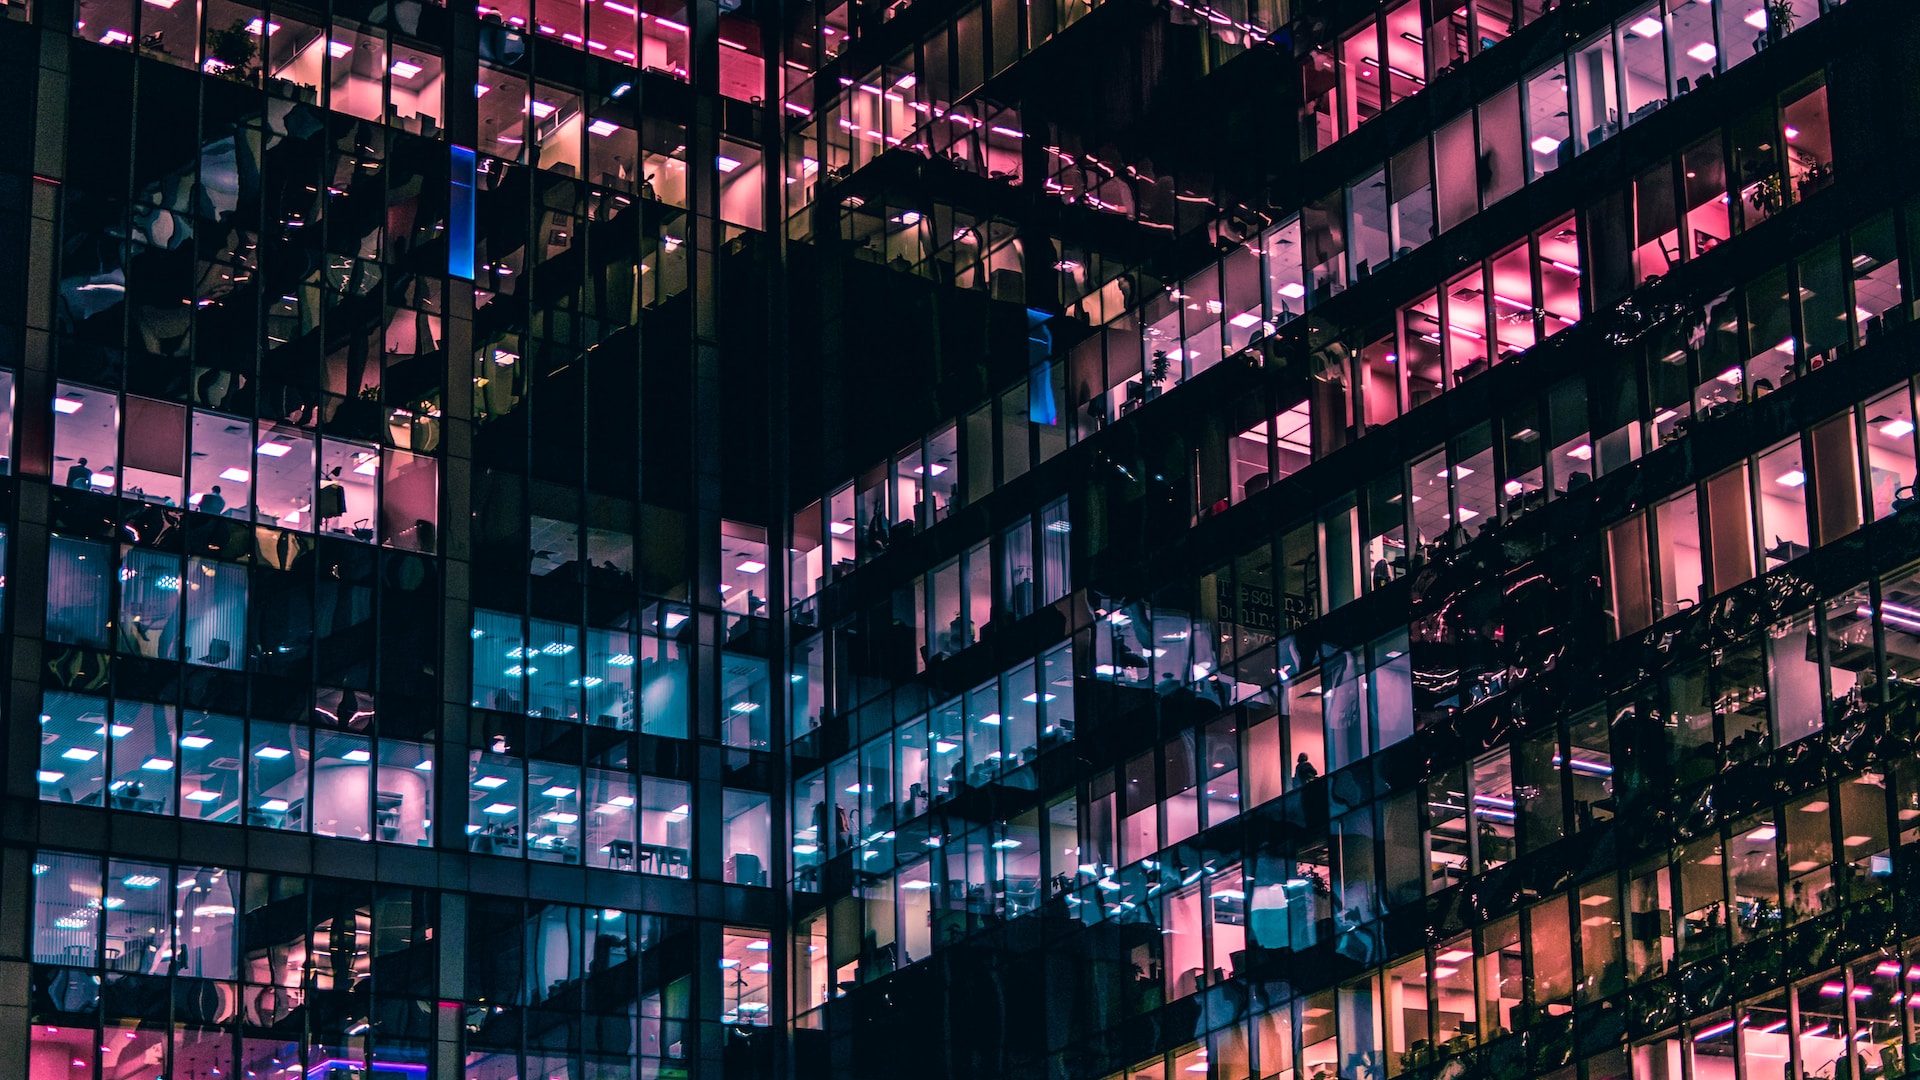 image of building with different lights, blue and pink, with some people in view | data-driven